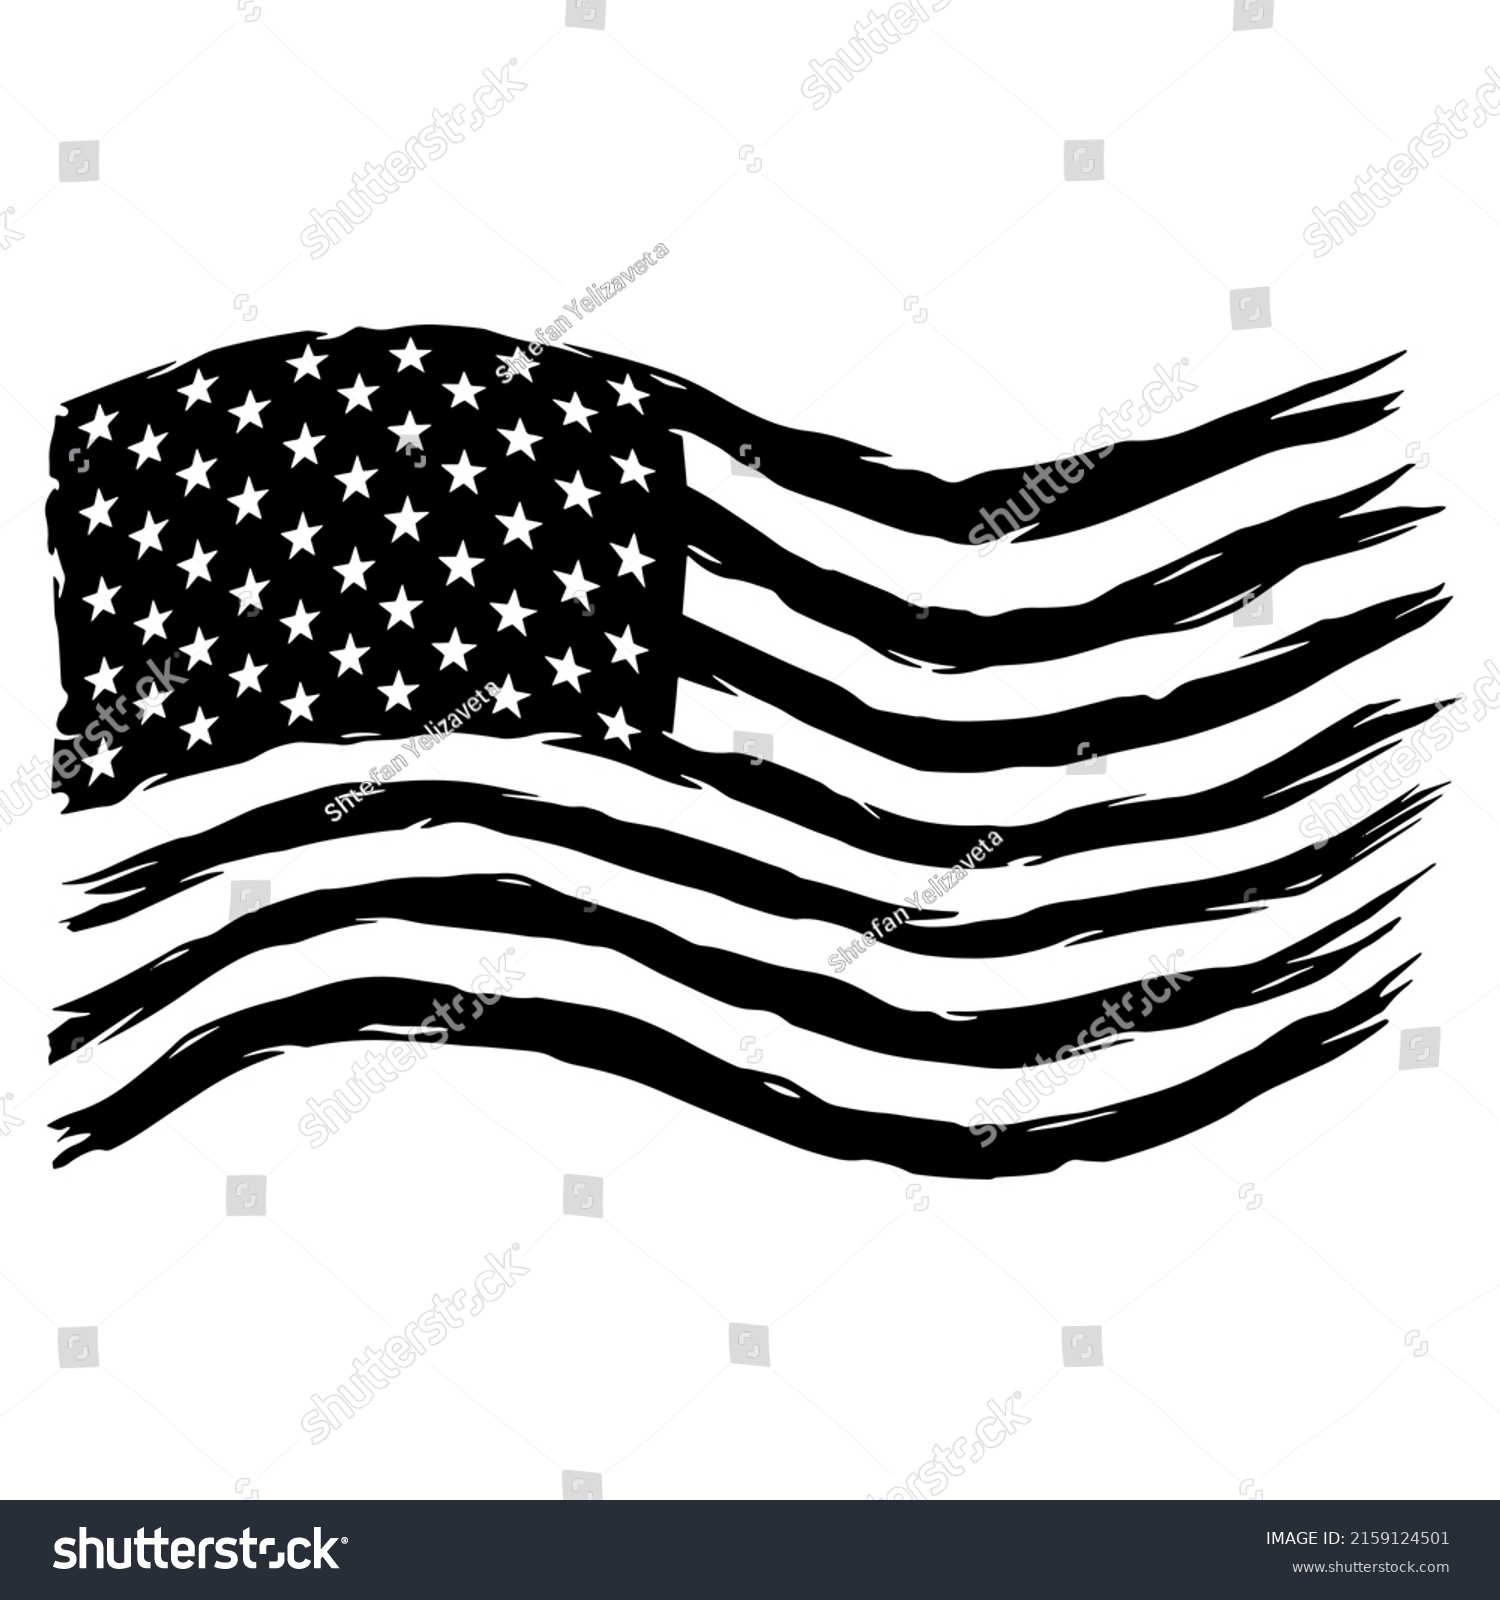 SVG of American Distressed Flag. USA Grunge Patriotic Symbol. Silhouette Stoke Icon.United States of America american flag, black isolated on white background, vector illustration. svg